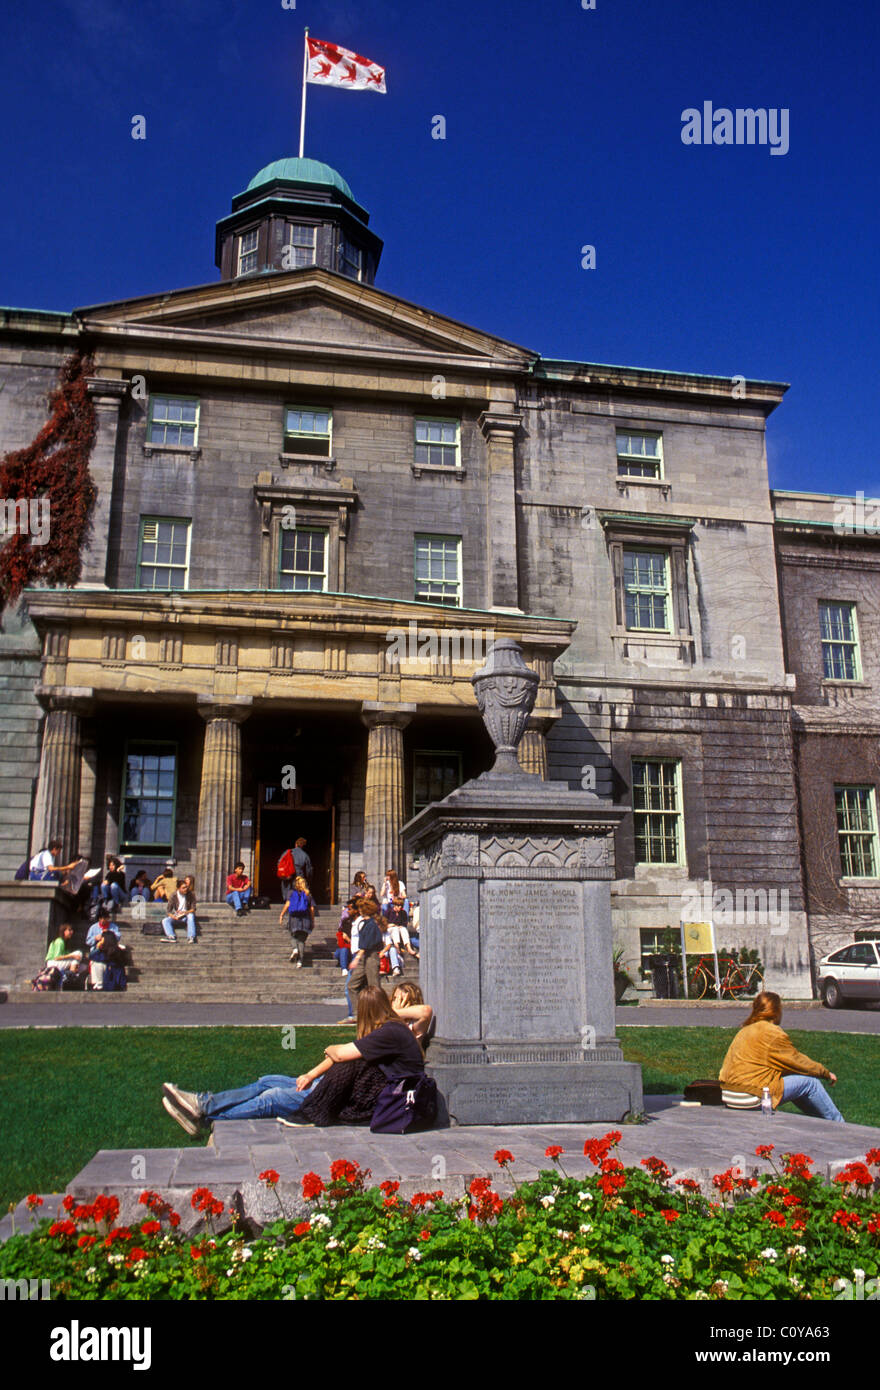 French-Canadians, French-Canadian, French-Canadian students, students, on campus, campus, McGill University, Montreal, Quebec Province, Canada Stock Photo